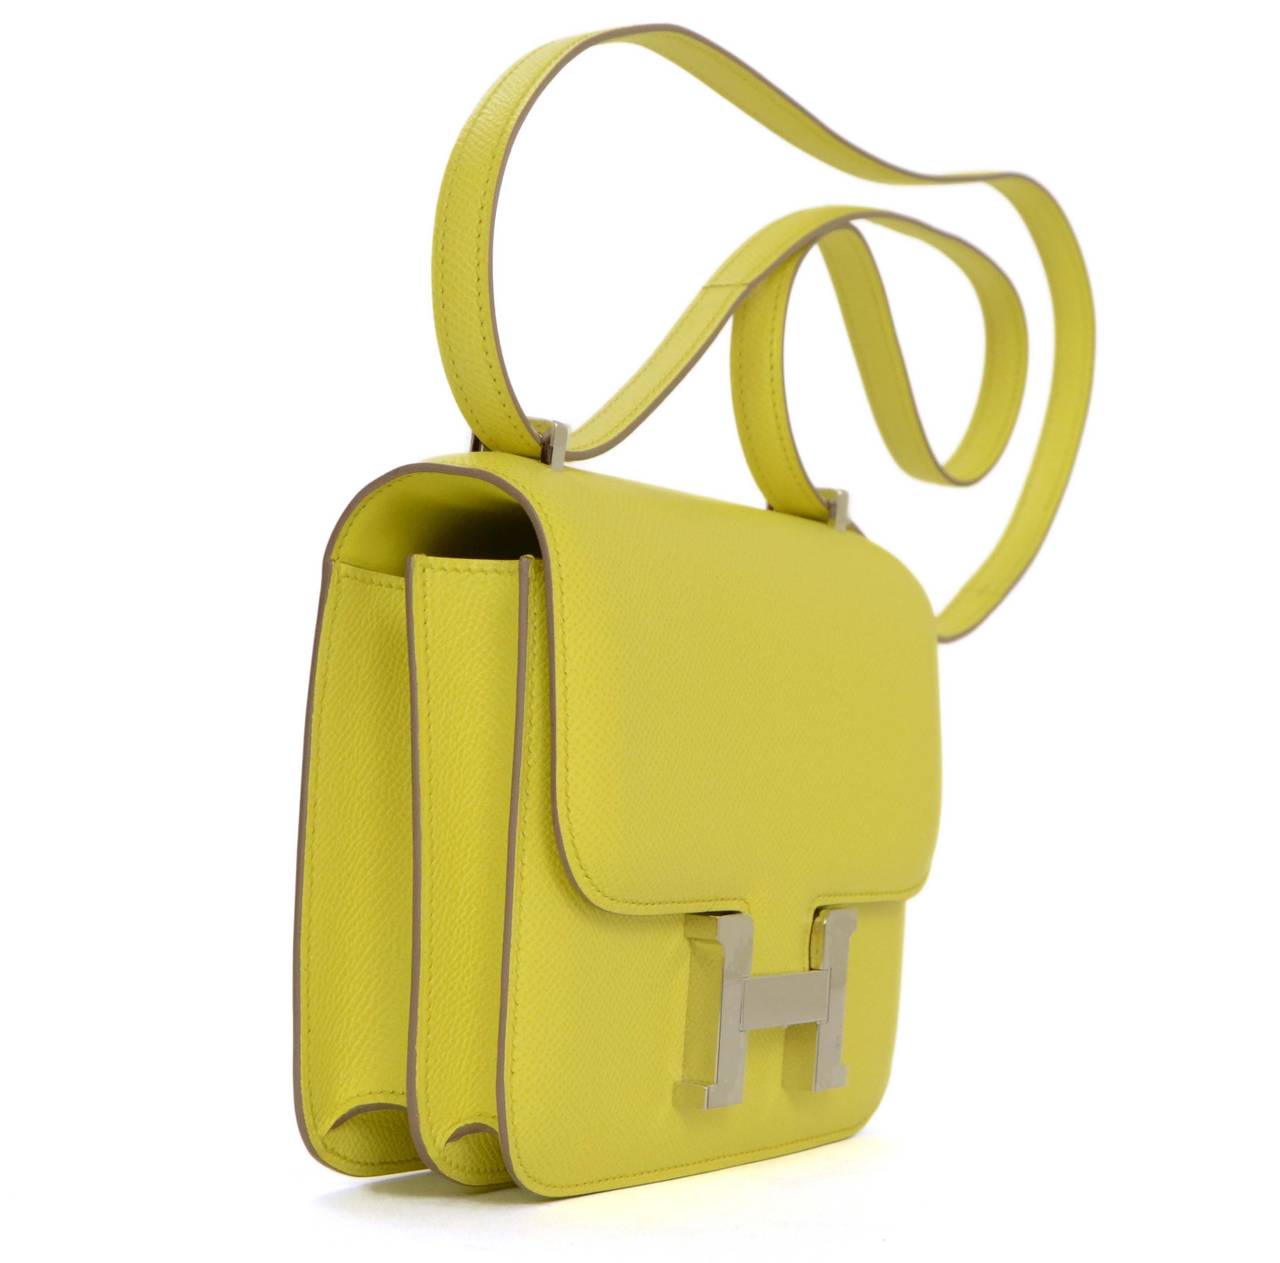 Hermes Soufre Yellow Epsom 18cm H Constance Bag
Features adjustable shoulder strap
Made In: France
Year of Production: 2013
Color: Yellow and silvertone
Hardware: Palladium
Materials: Epsom leather
Lining: Yellow leather
Closure/Opening: